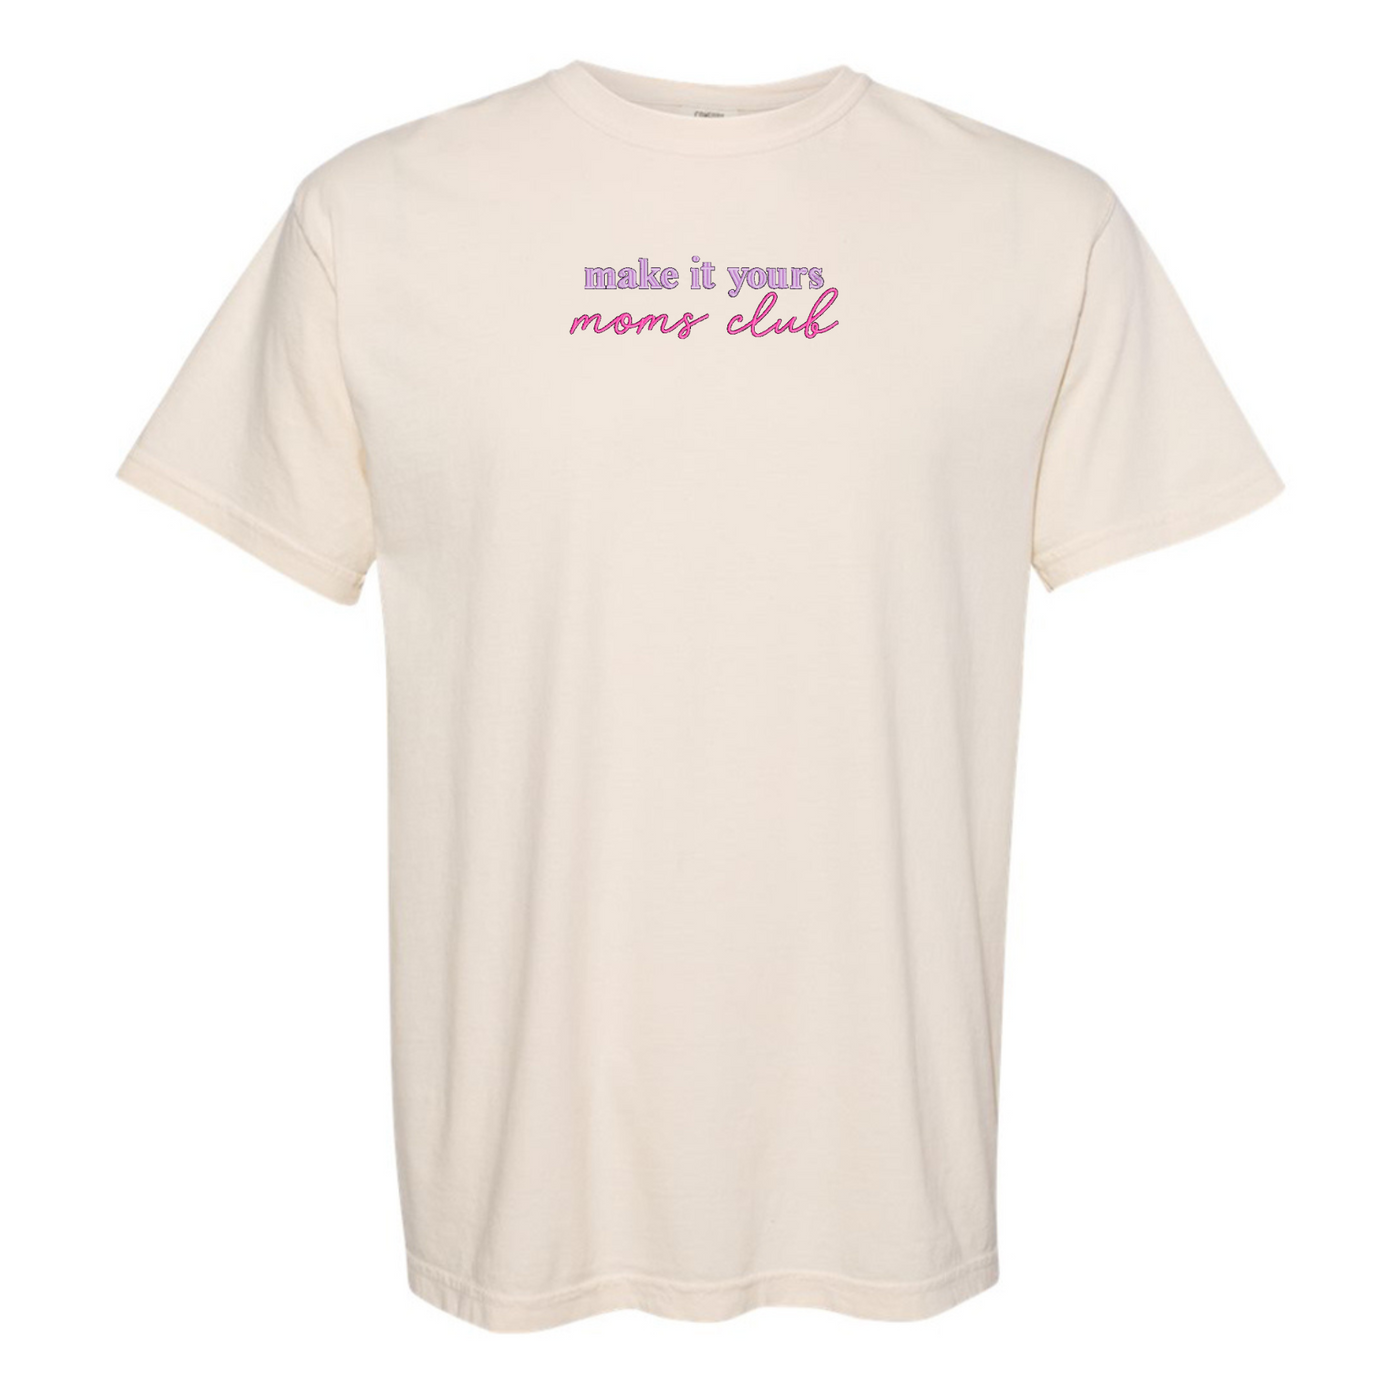 Make It Yours™ 'Moms Club' T-Shirt